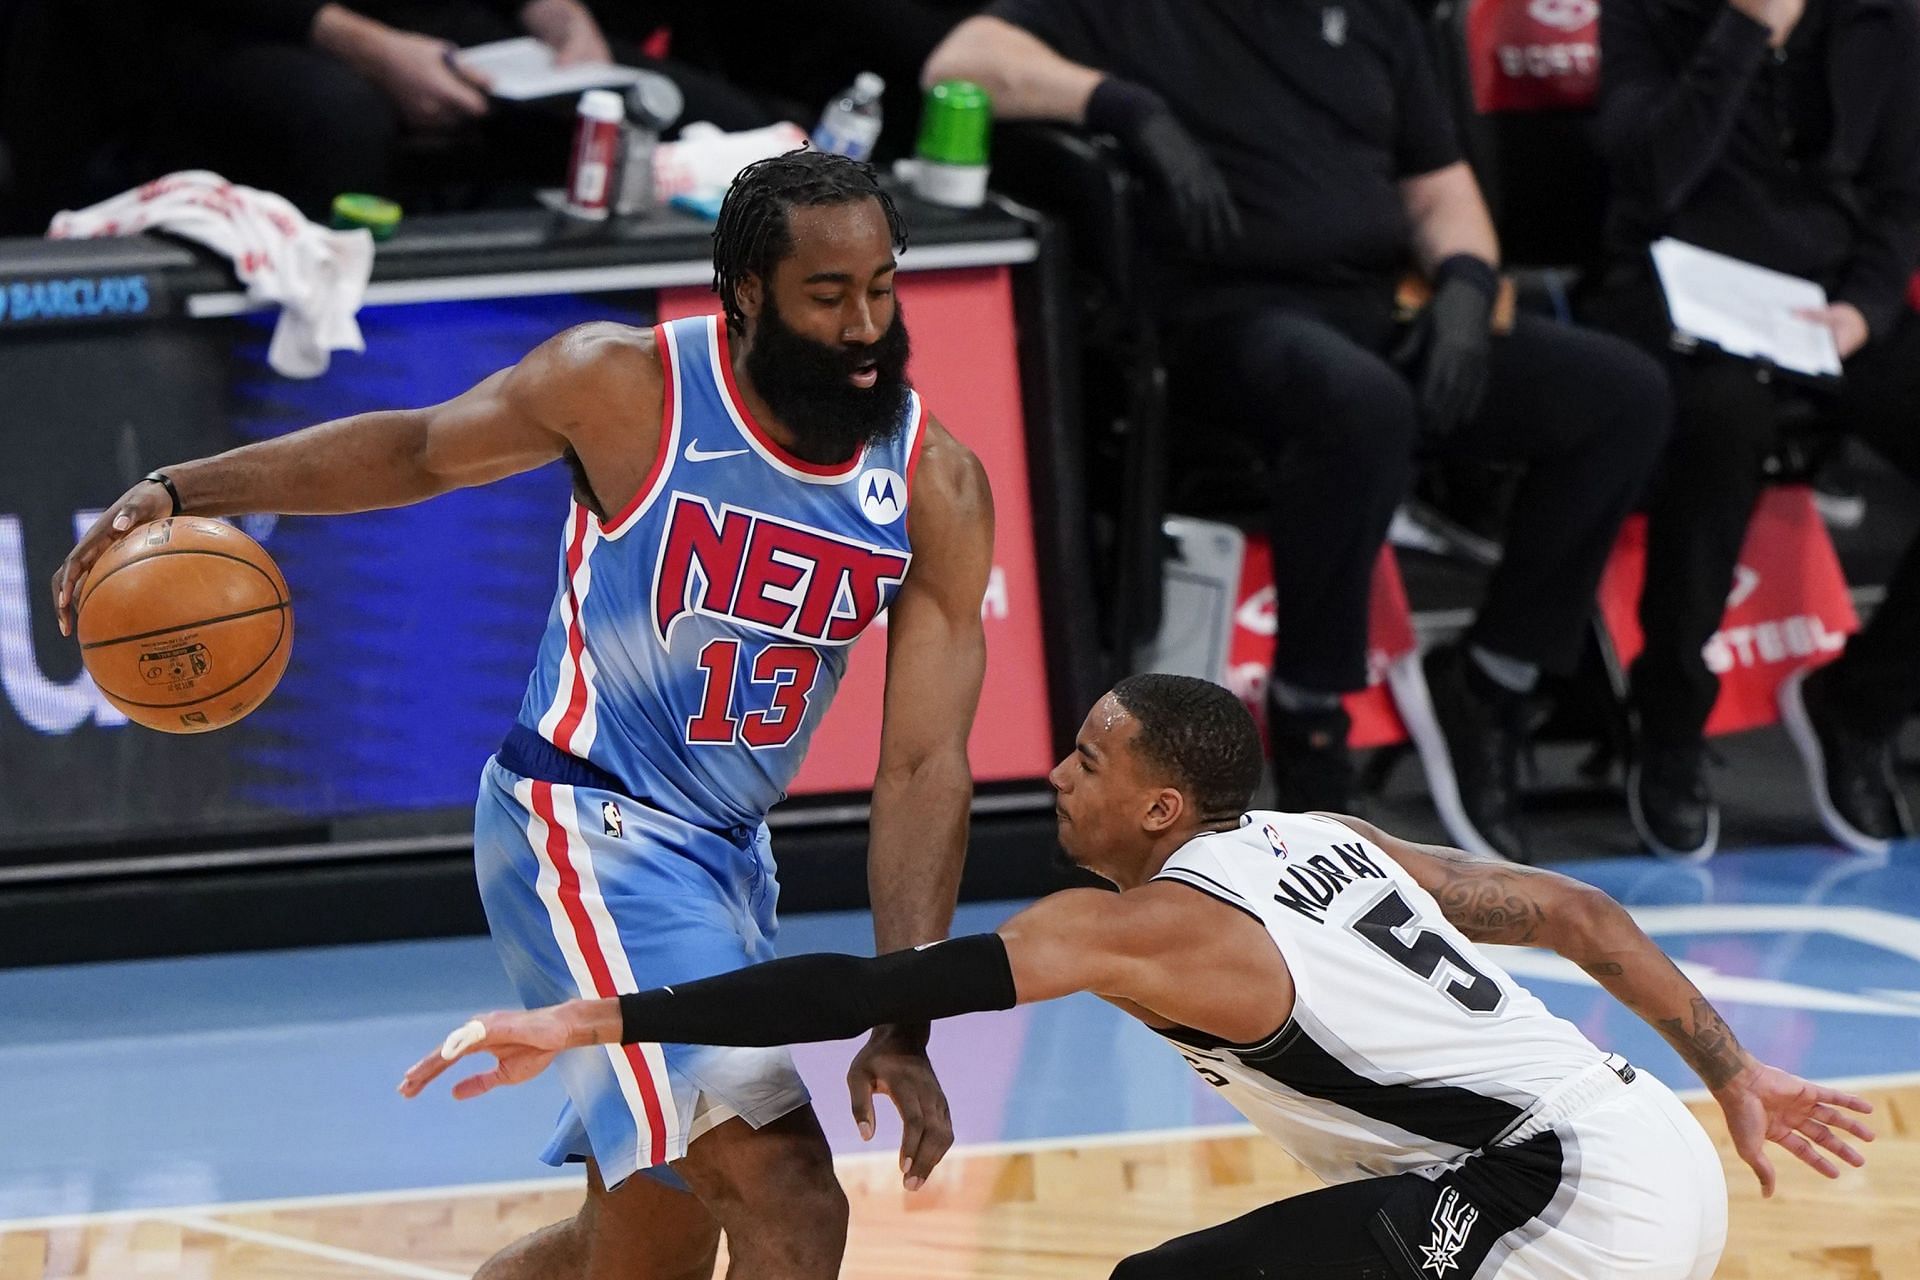 The visiting Brooklyn Nets barely squeaked past the depleted San Antonio Spurs in their last matchup. [Photo: KSAT 12] Brooklyn has been a good road team even before Kyrie Irving rejoined the team. [Photo: NBA.com]